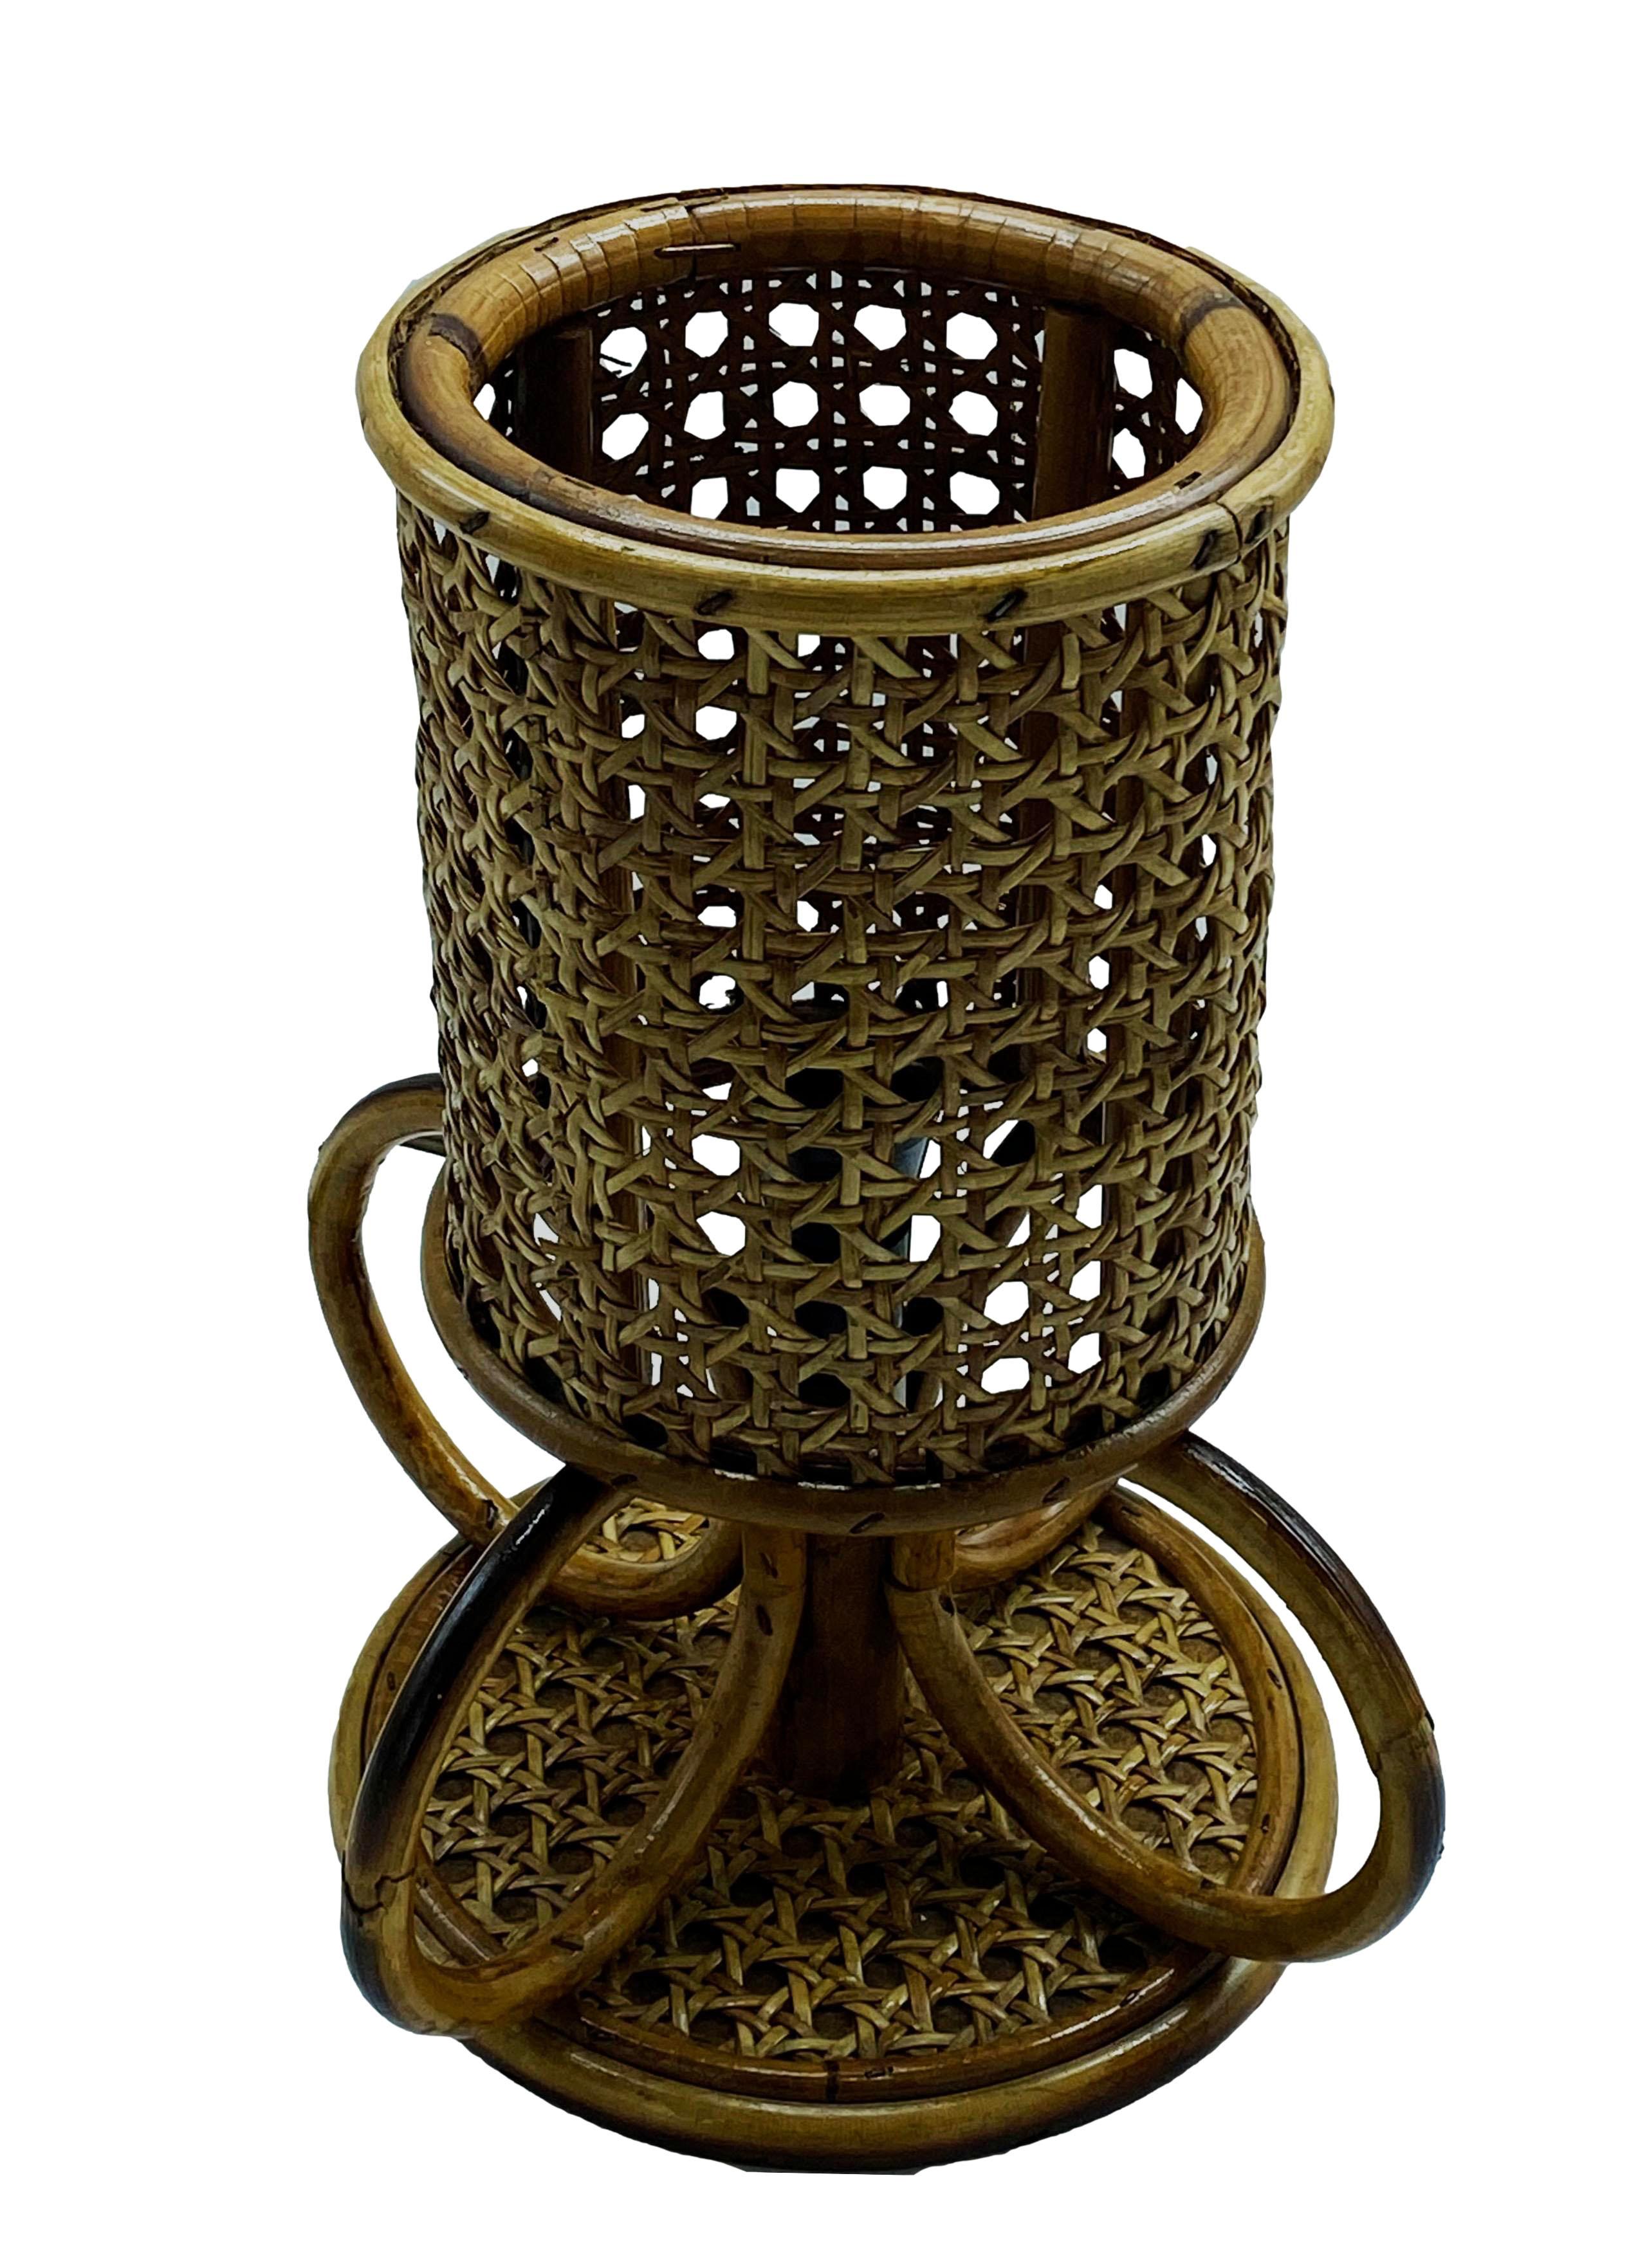 Delightful little table or bedside lamp made from bamboo and rattan. The shade is made of Viennese mesh, while the base shows a rattan and bamboo construction.
 